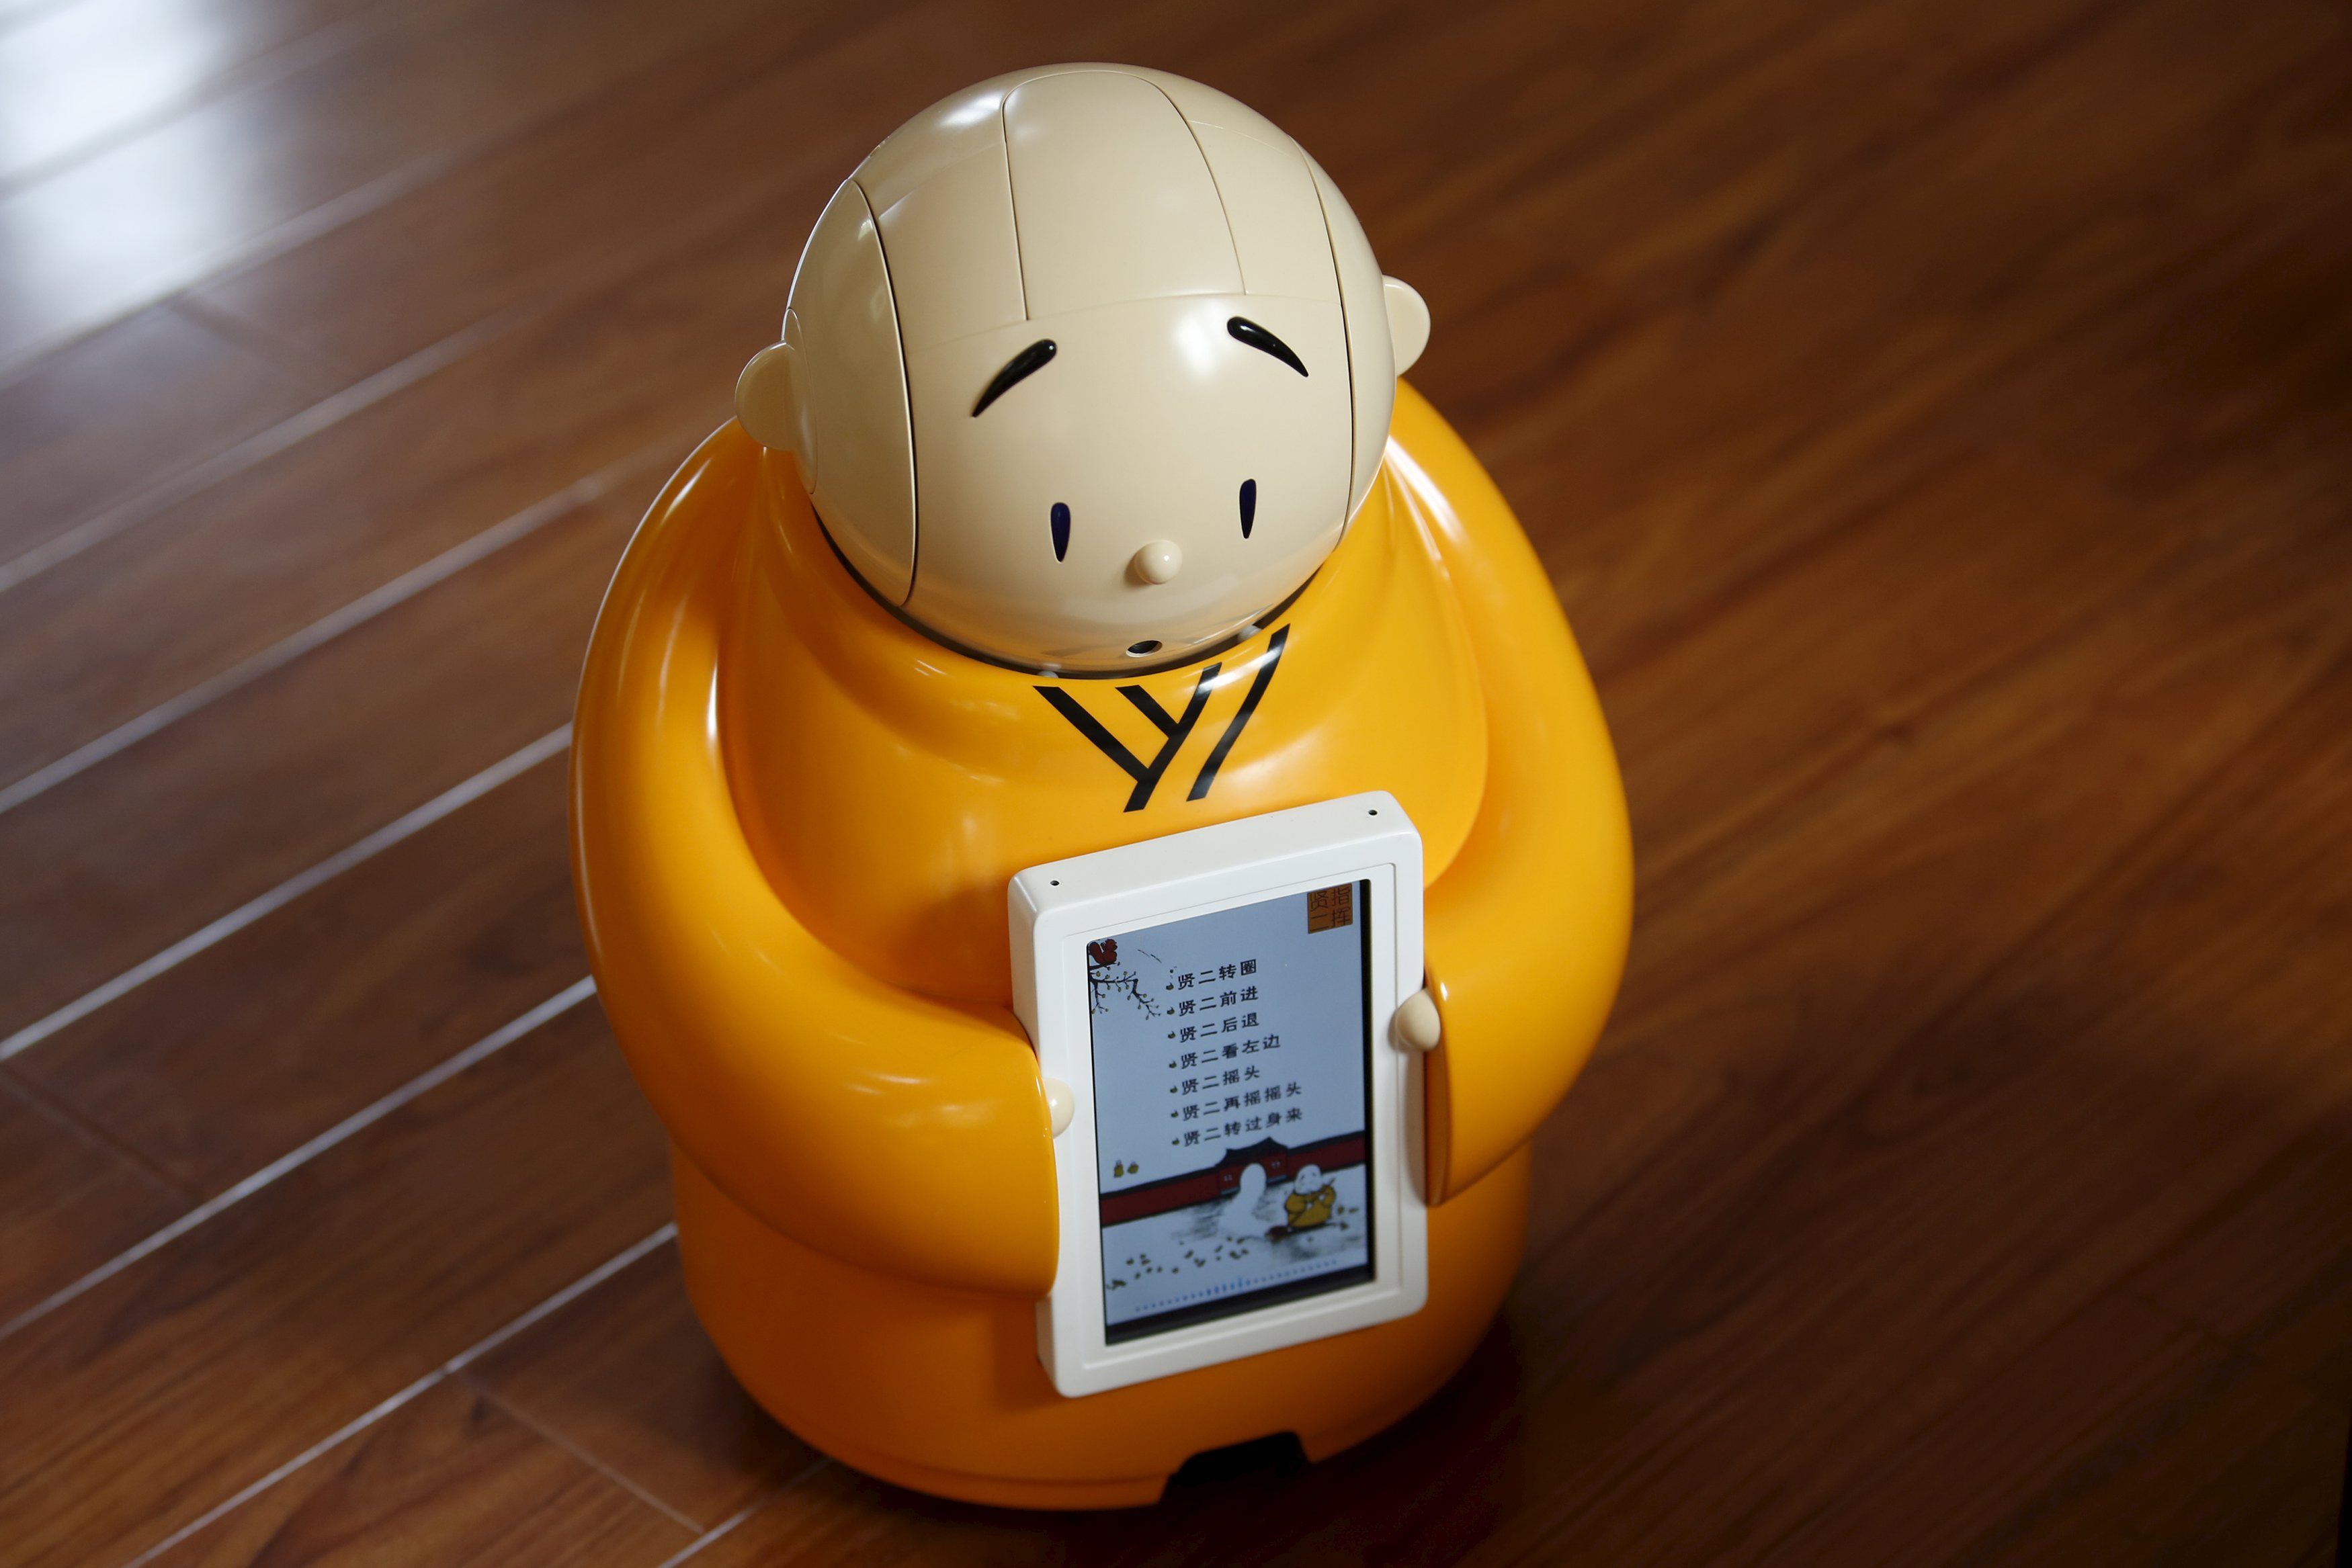 This Buddhist Temple In China Has An Adorable Robot Monk To Attract Devotees